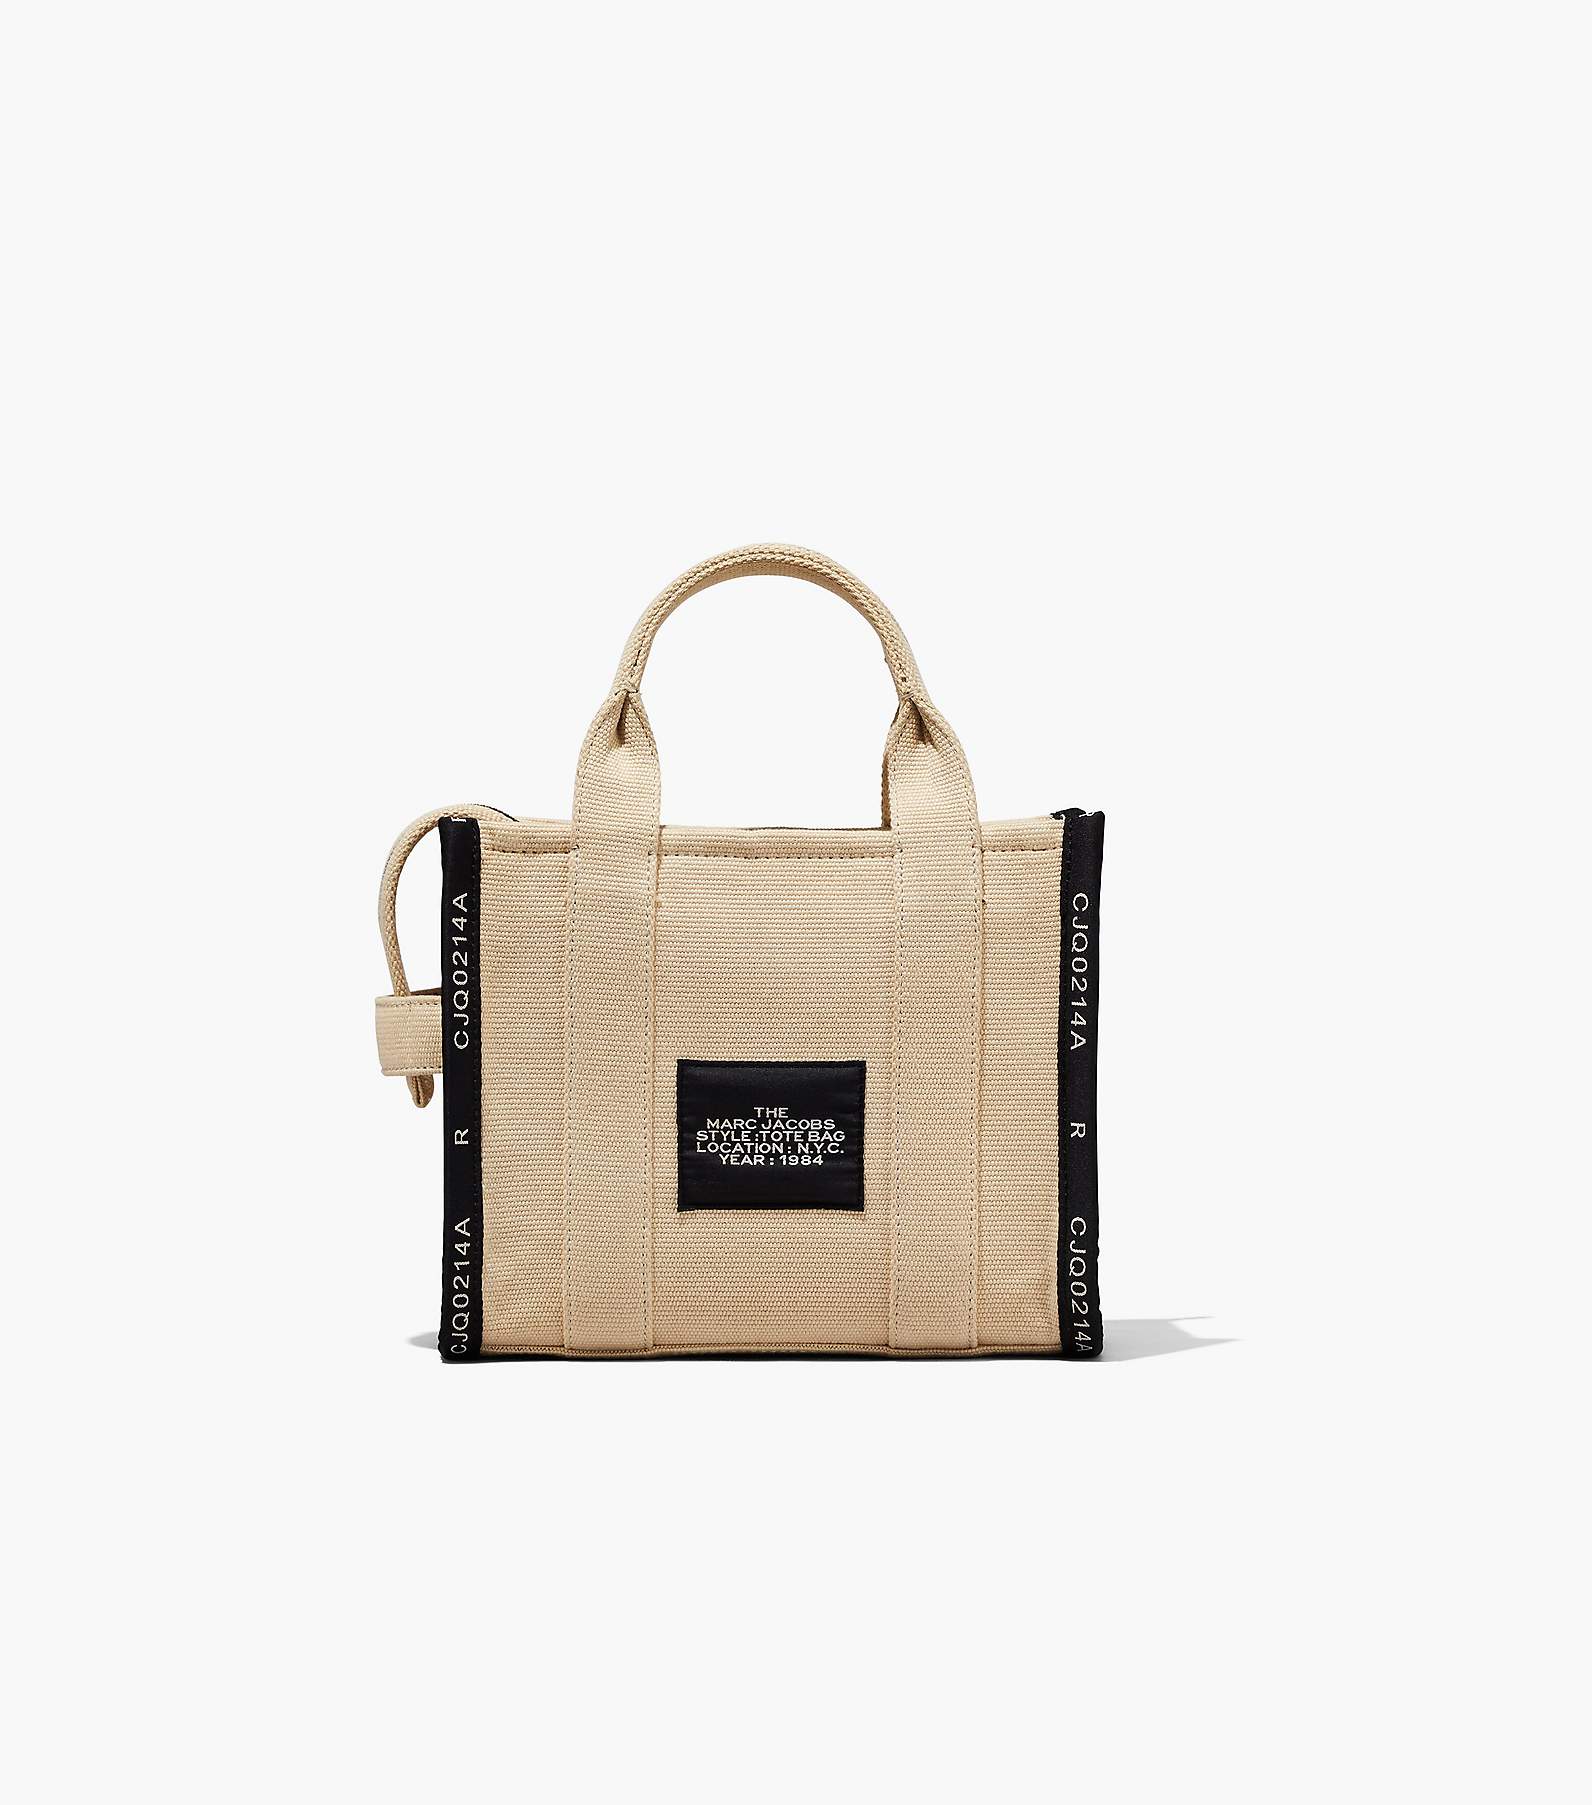 Thoughts on MARC JACOBS The Tote Bag Mini in leather? : r/handbags